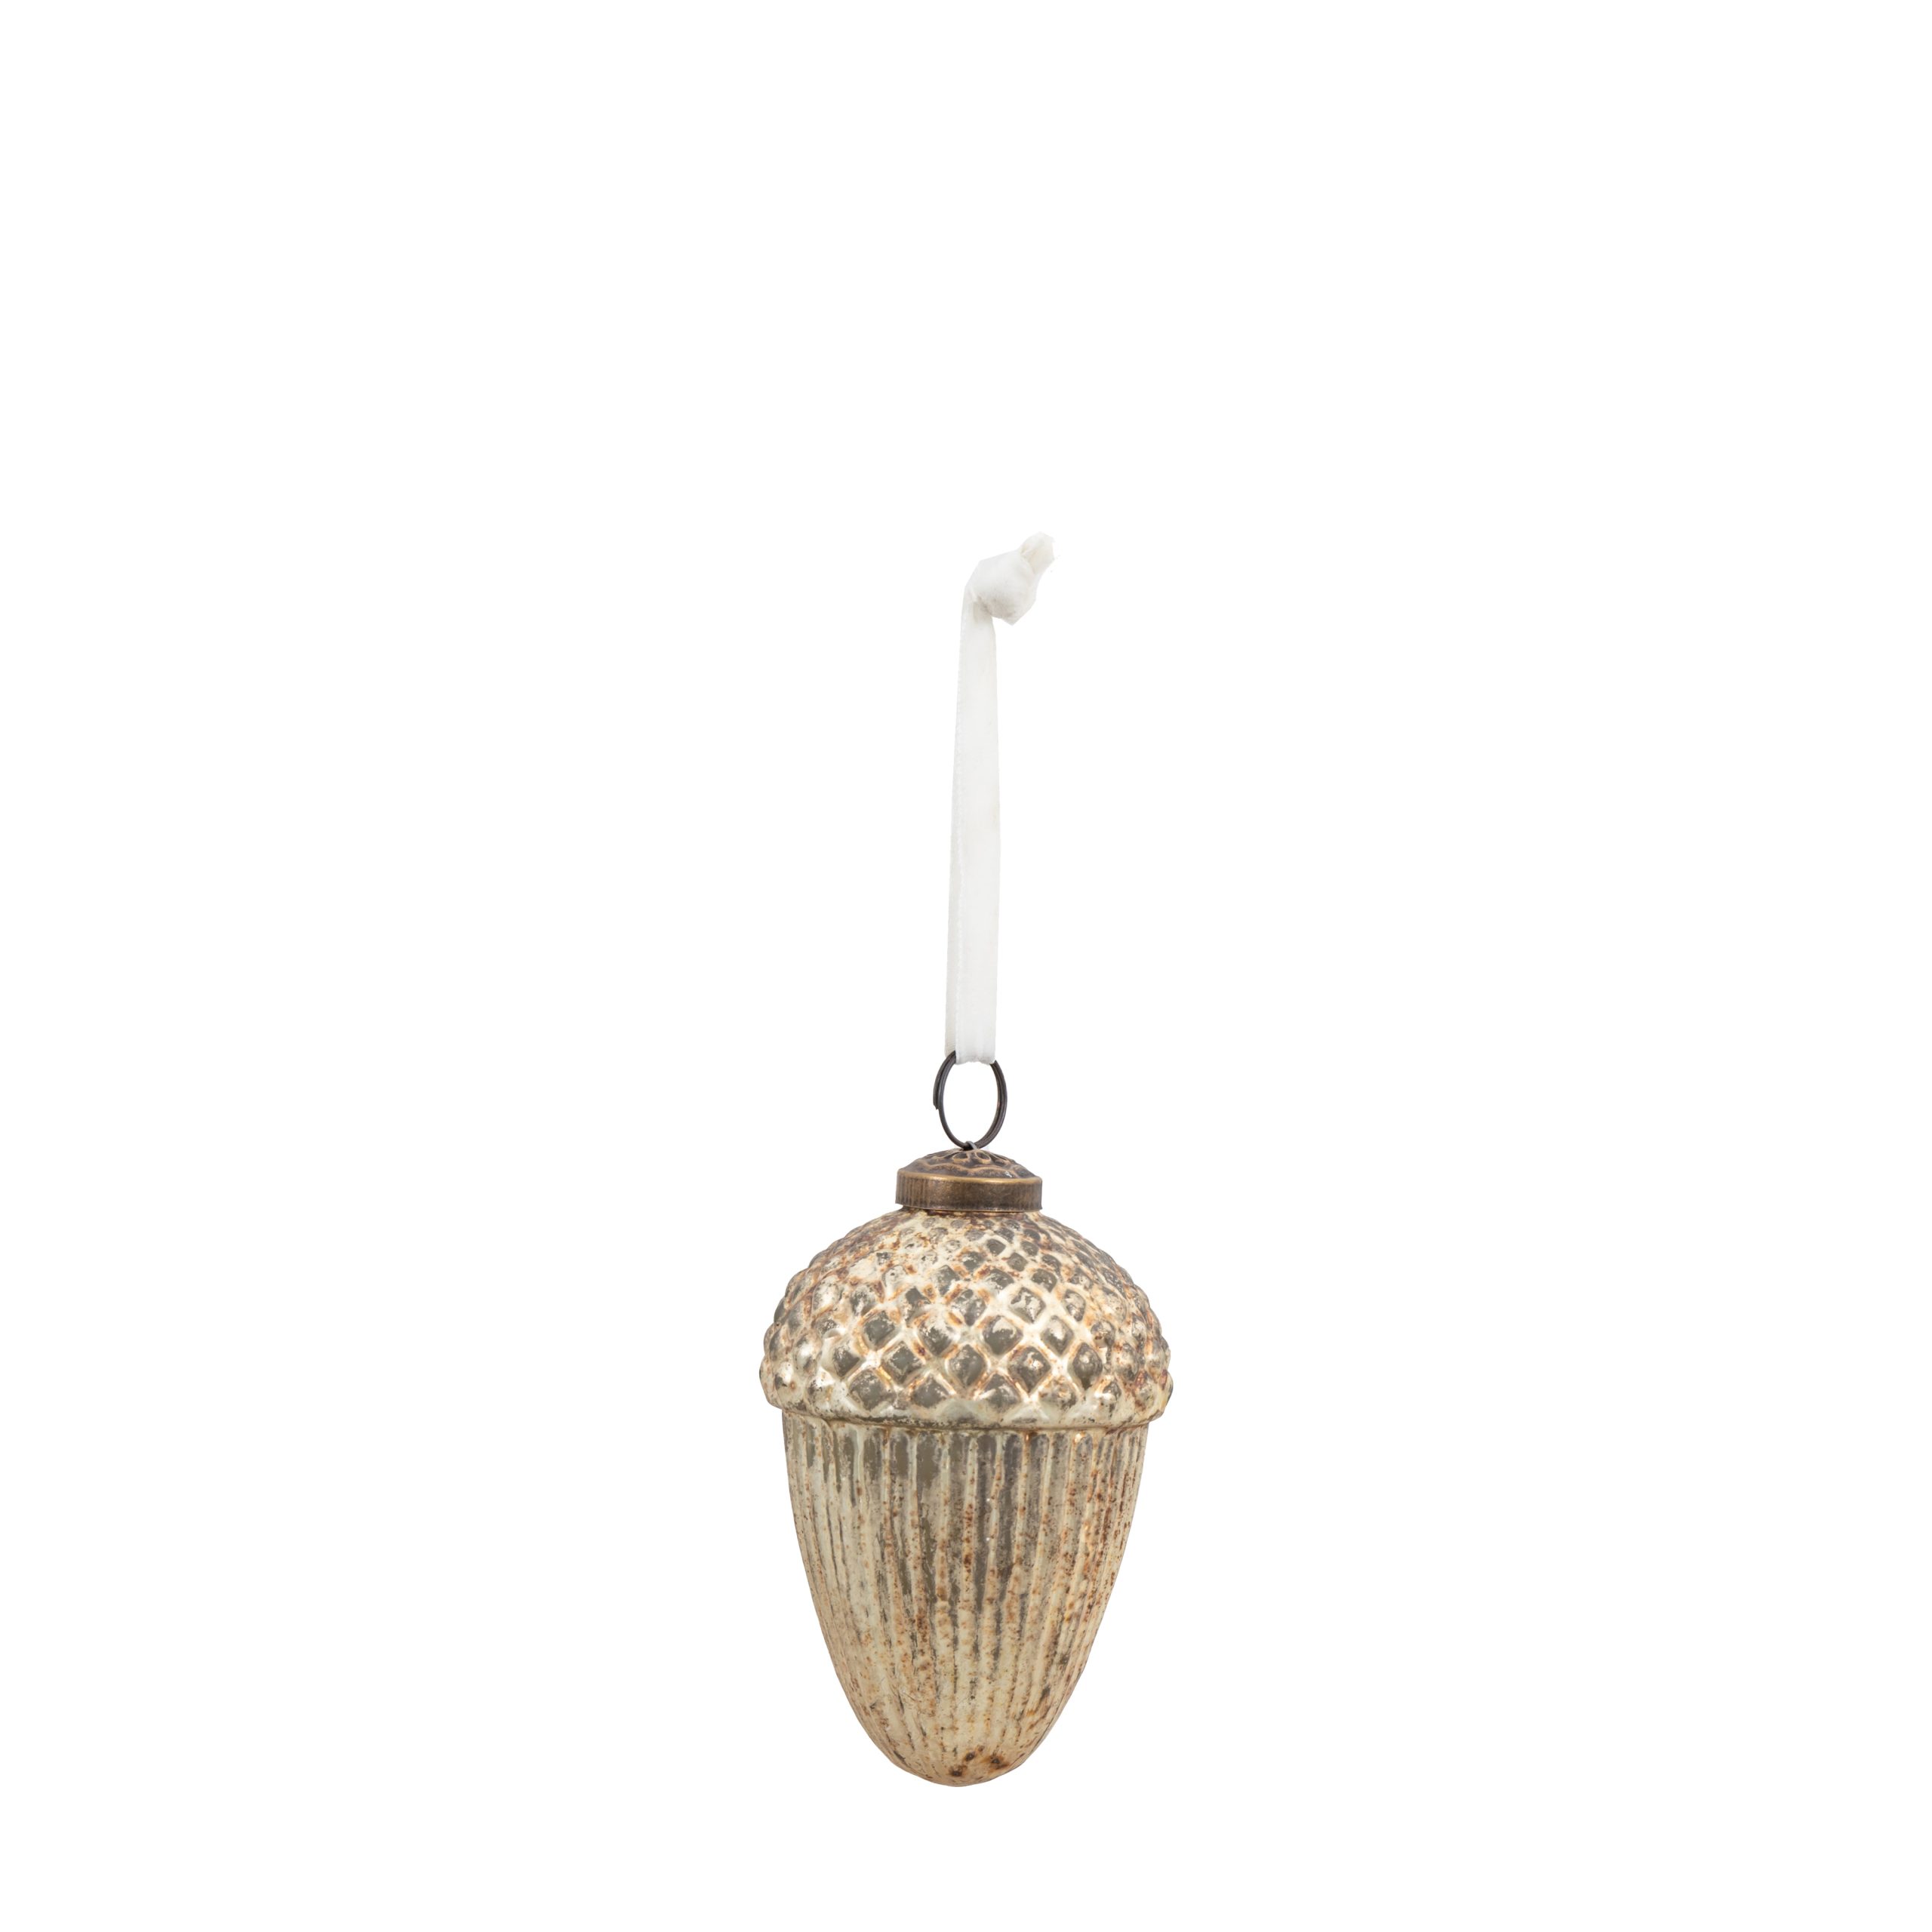 Gallery Direct Acorn Bauble Antique Gold (Set of 6